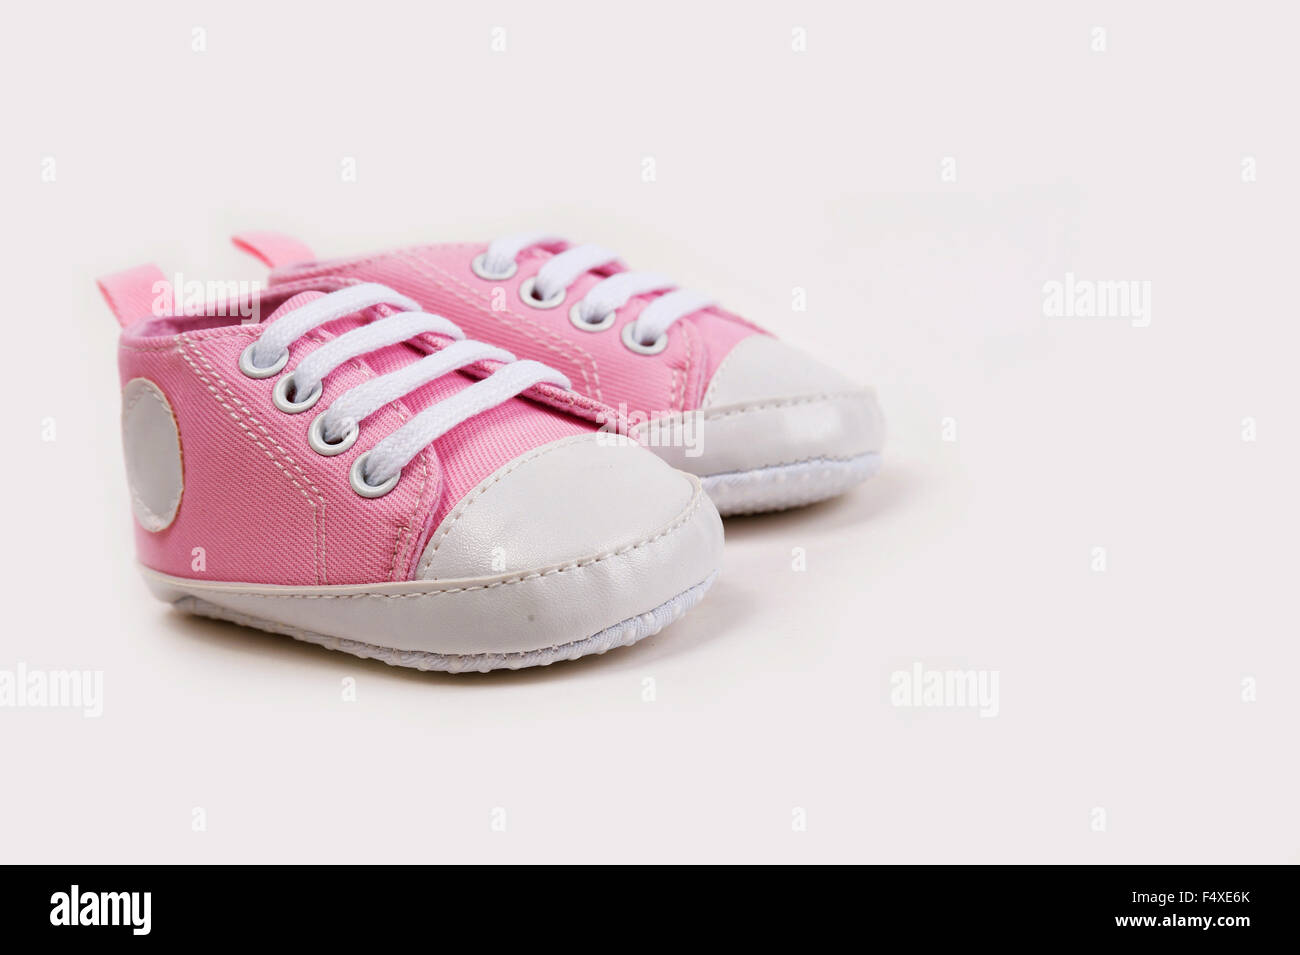 Cute pink baby girl shoes / sneakers on white background close up Stock Photo